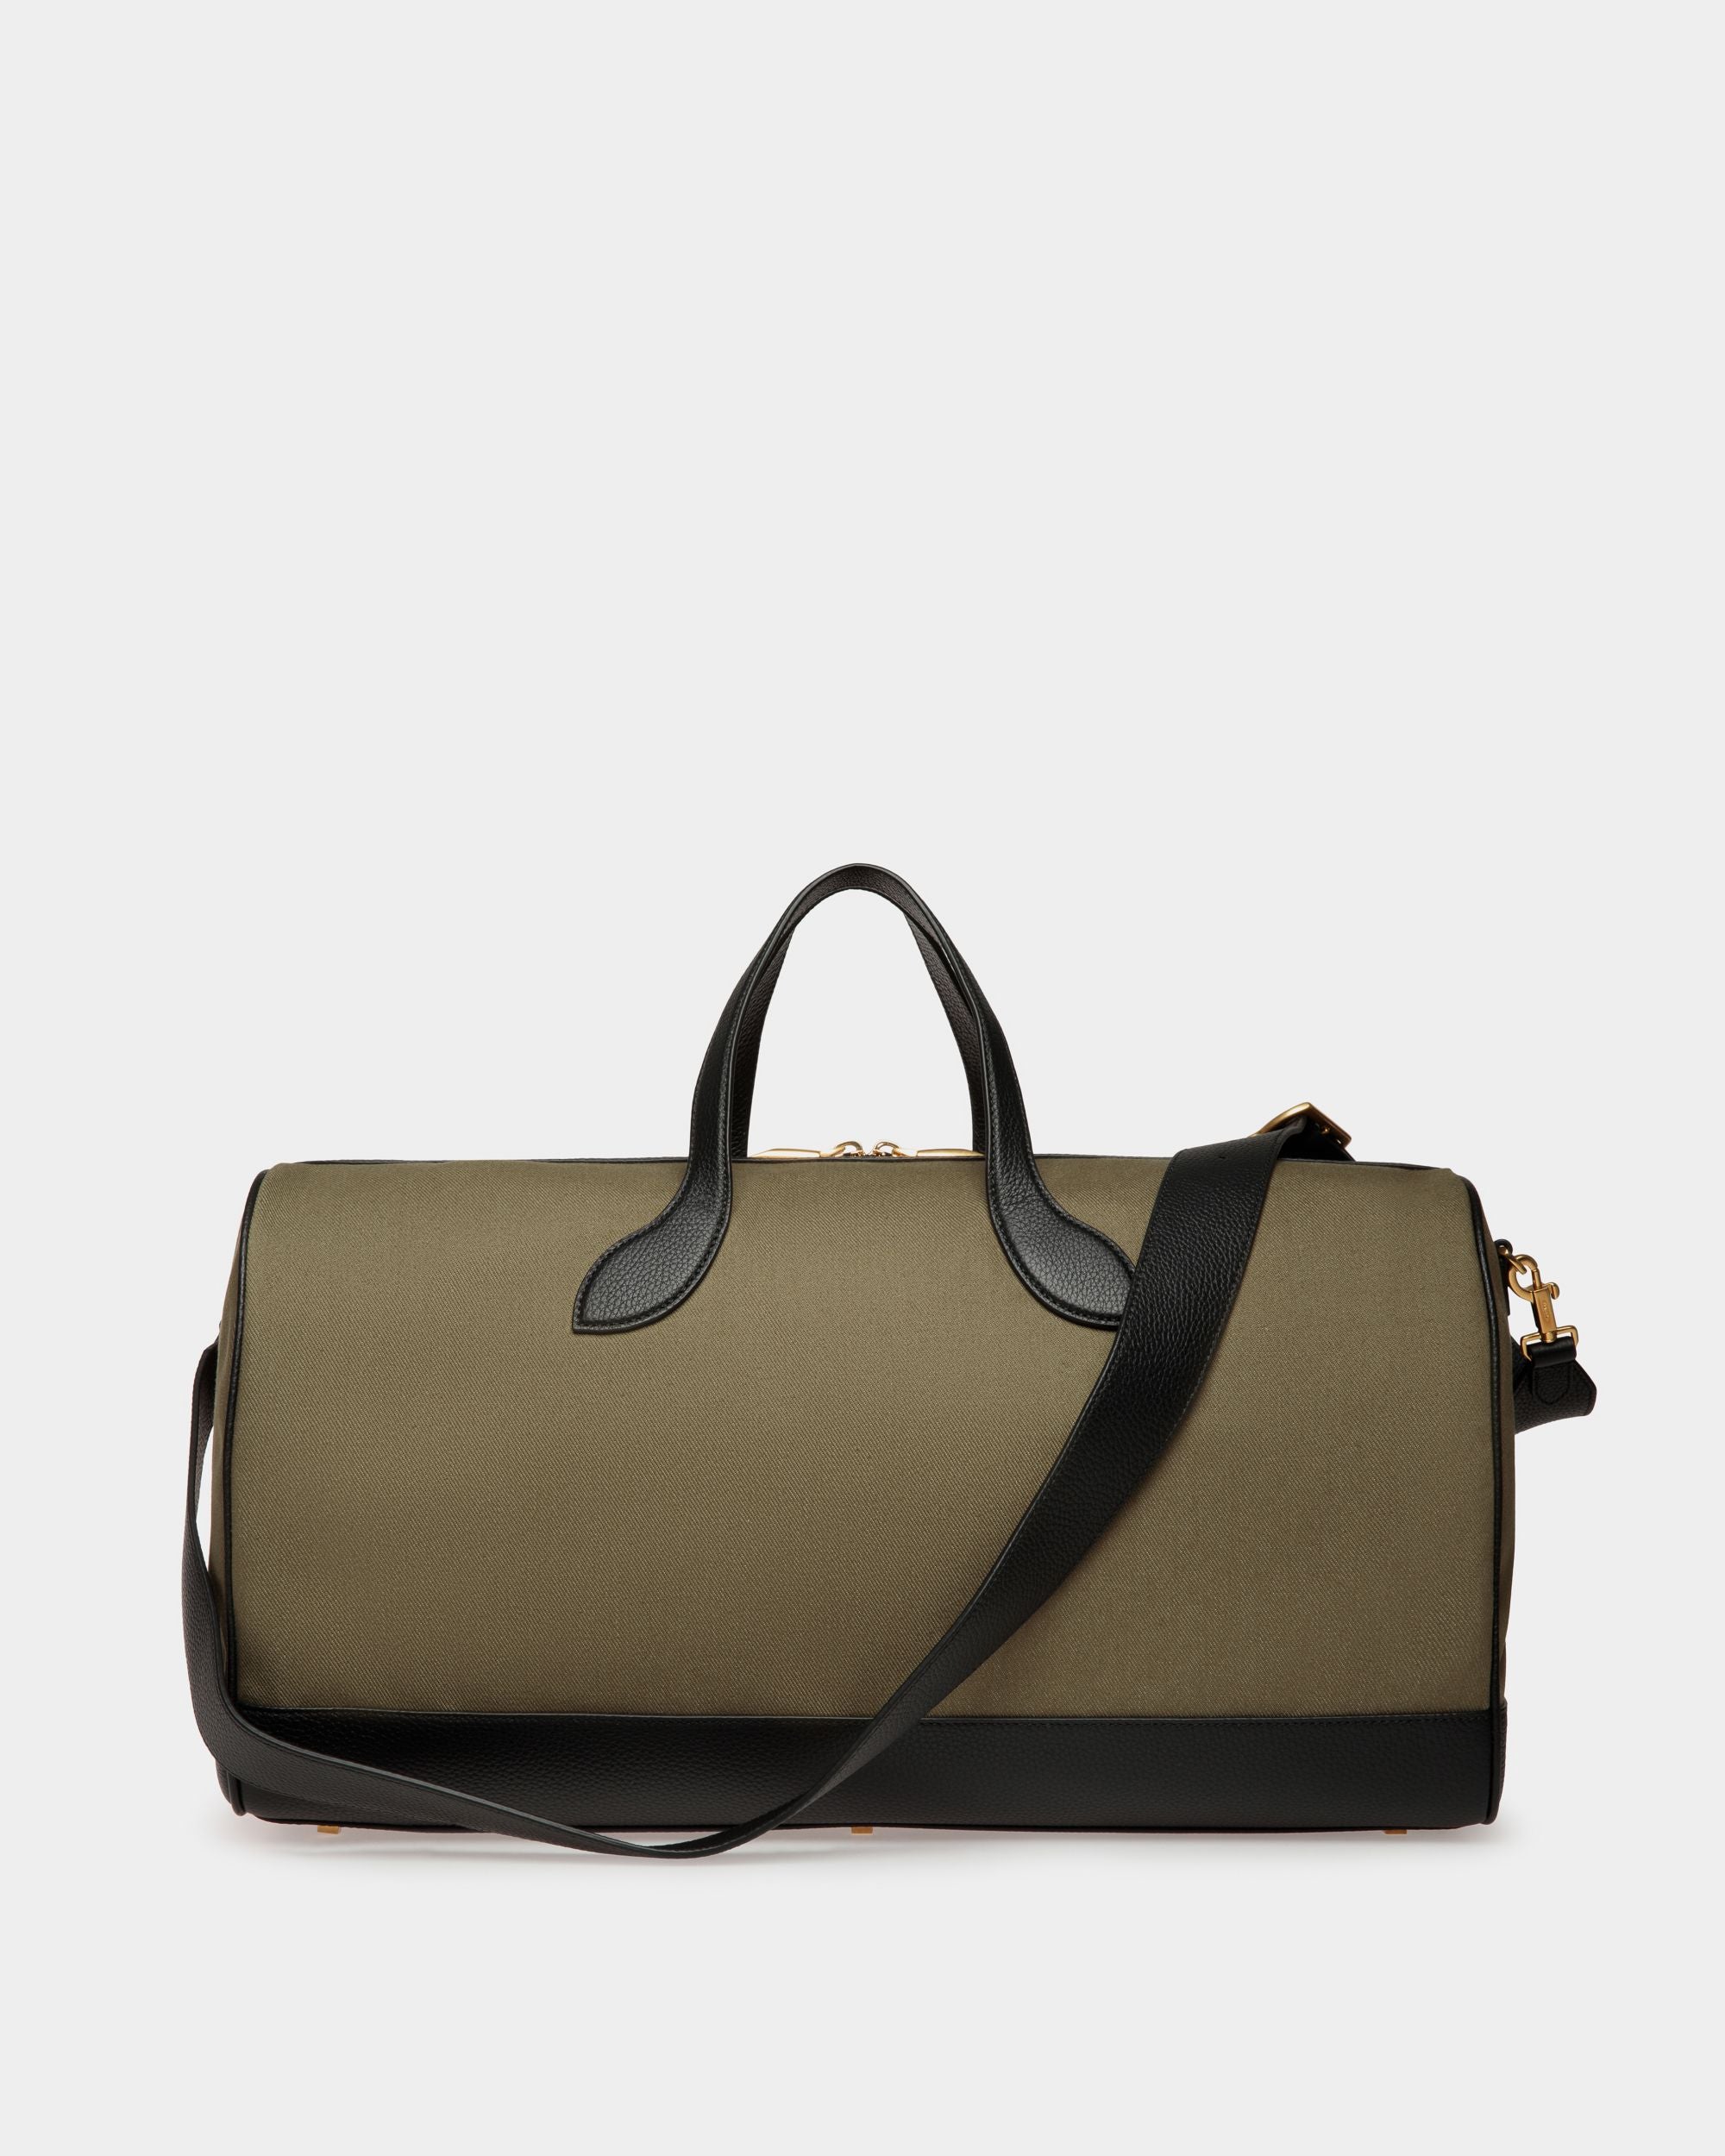 Bar | Men's Weekender in Green Canvas And Black Leather | Bally | Still Life Back